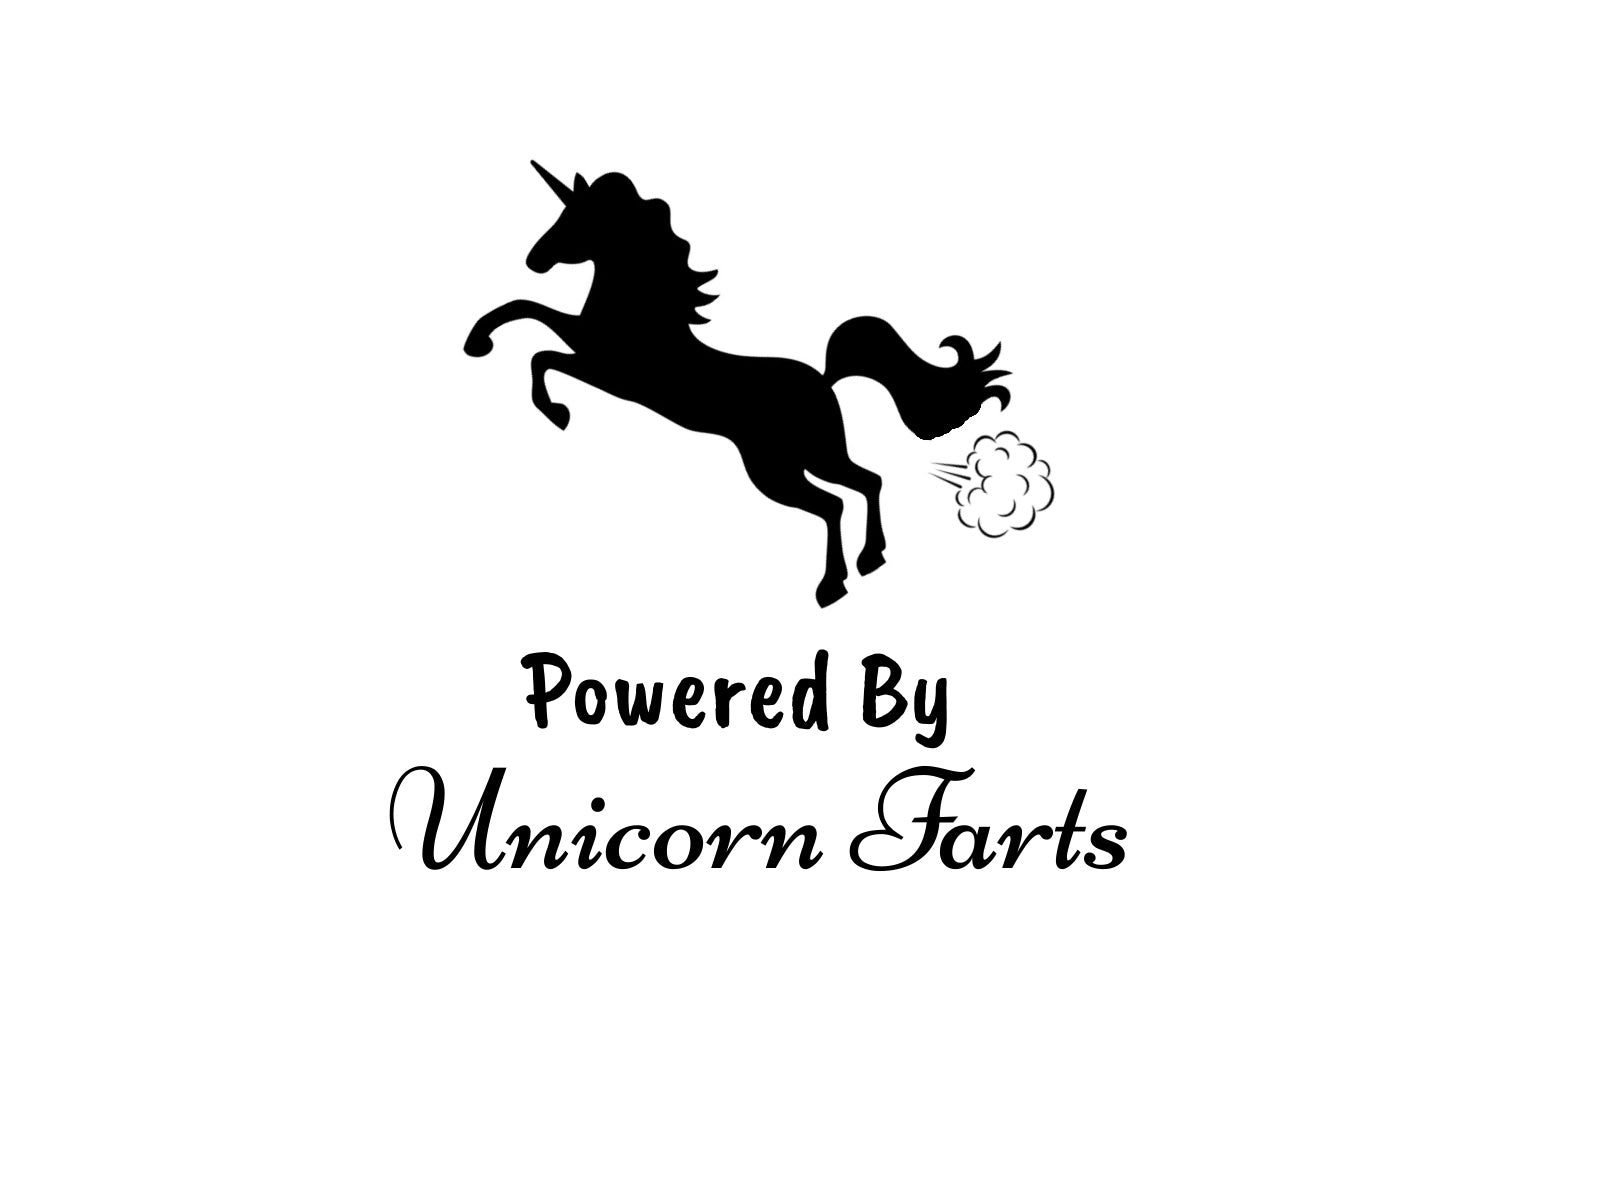 Powered by Unicorn Farts